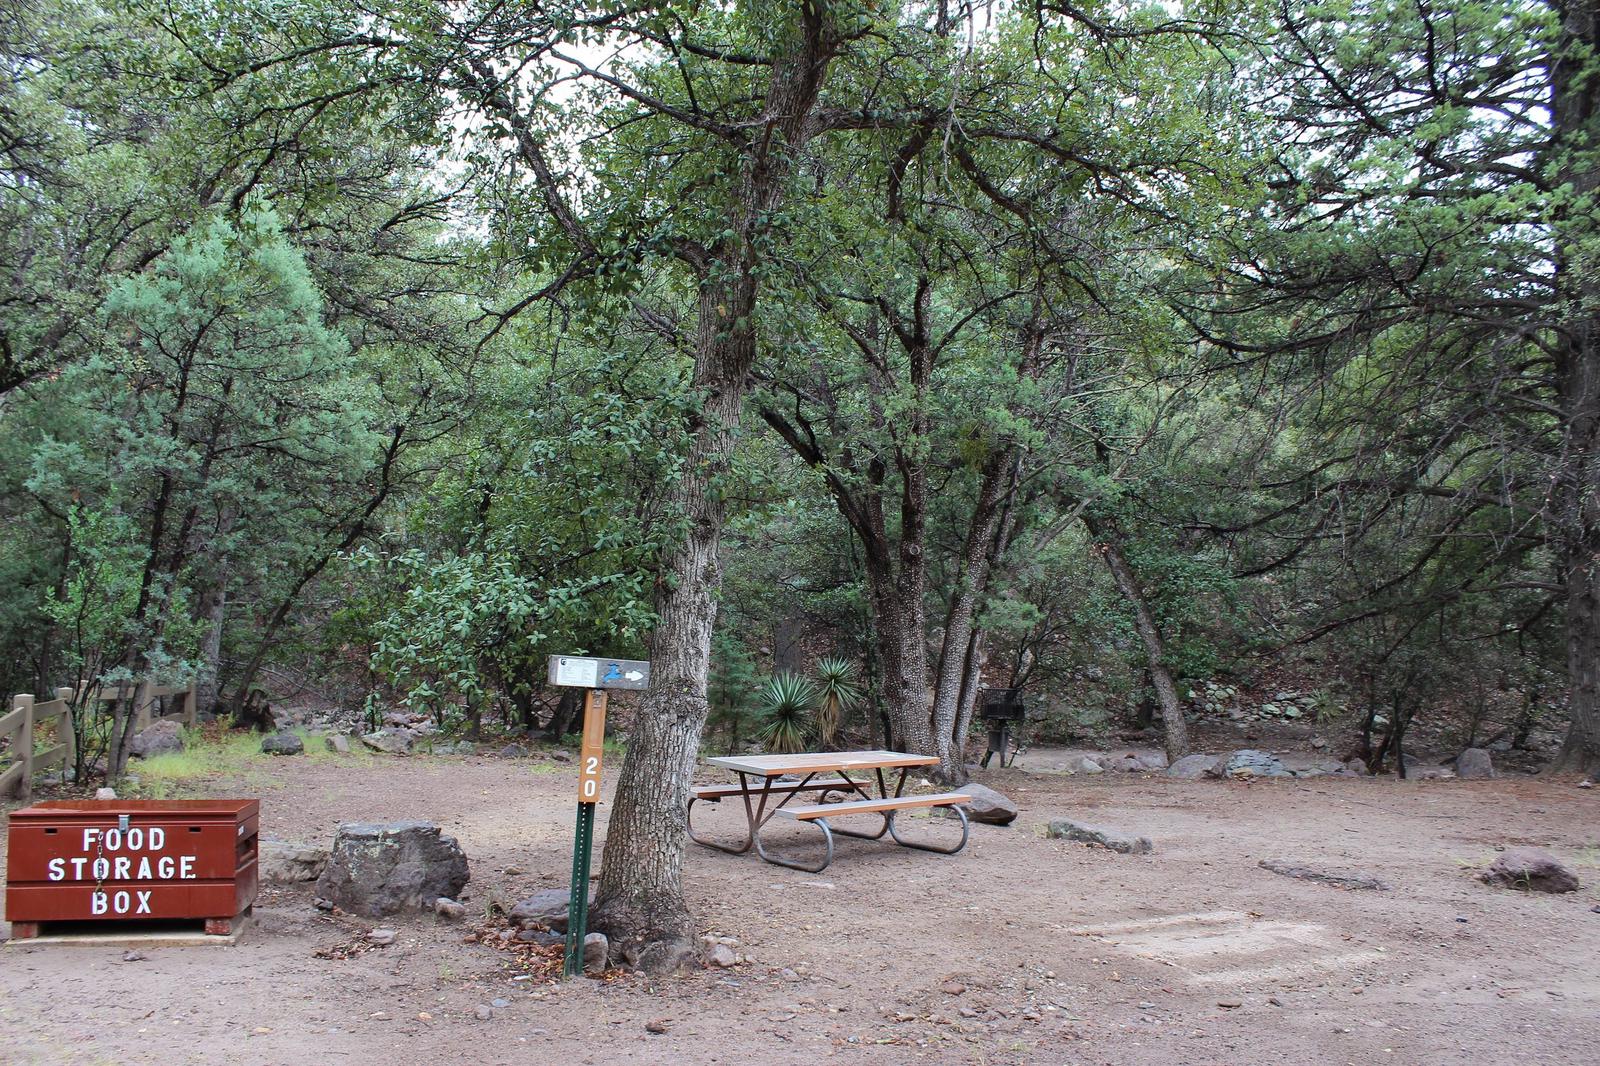 Campsite #20 is a long site best for trailers and motorhomes along Bonita Creek which flows seasonally.Campsite #20